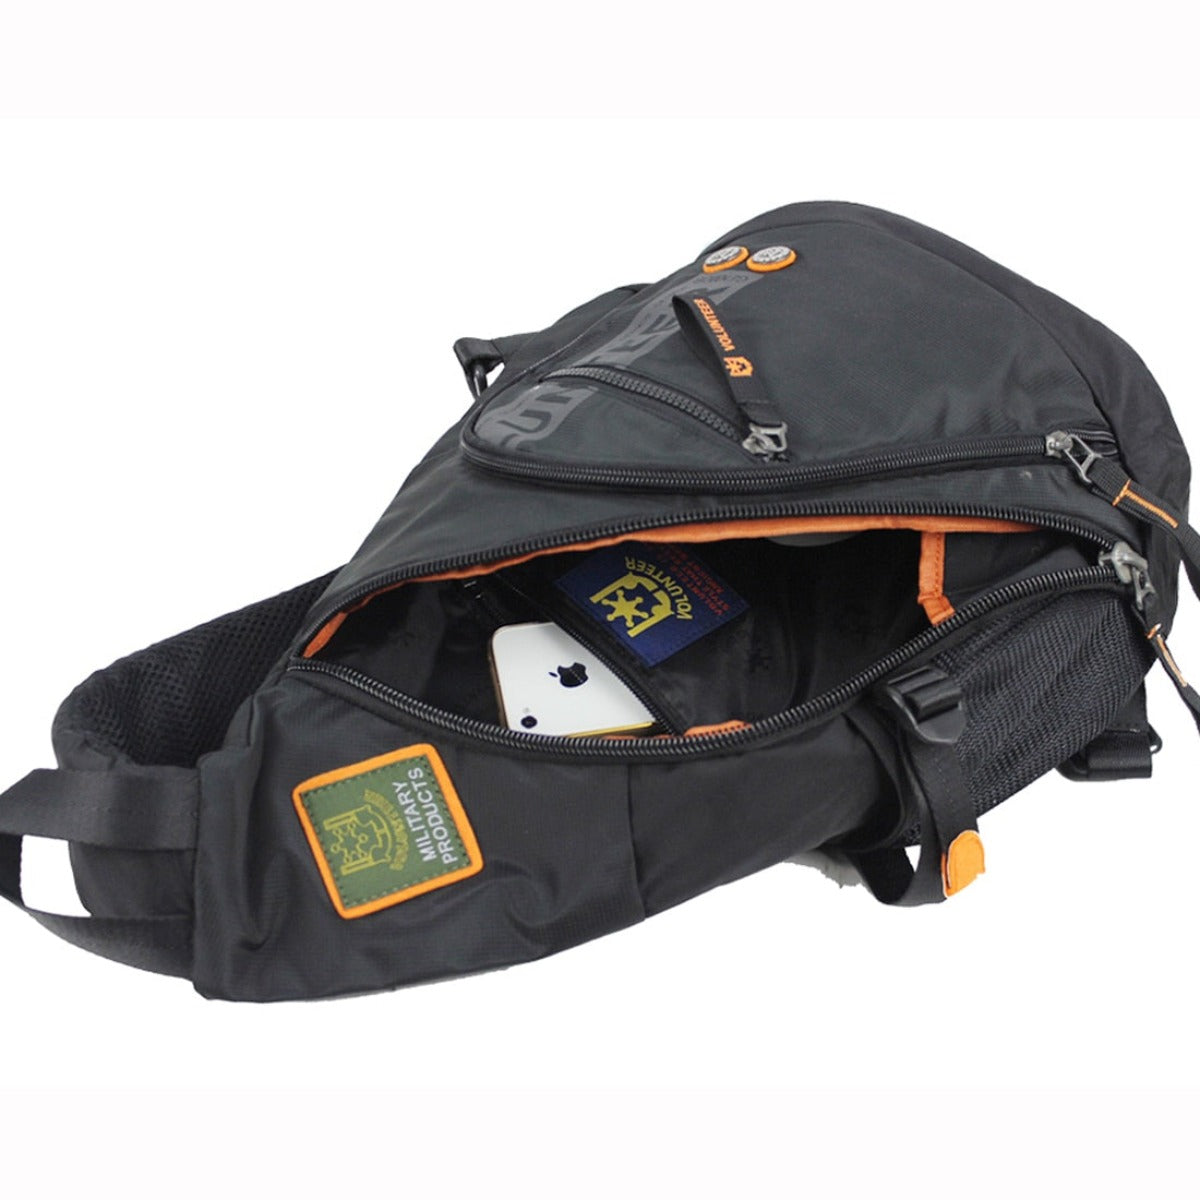 A Biker Sling Backpack Single Strap Rucksack, Waterproof Oxford with a cell phone inside.